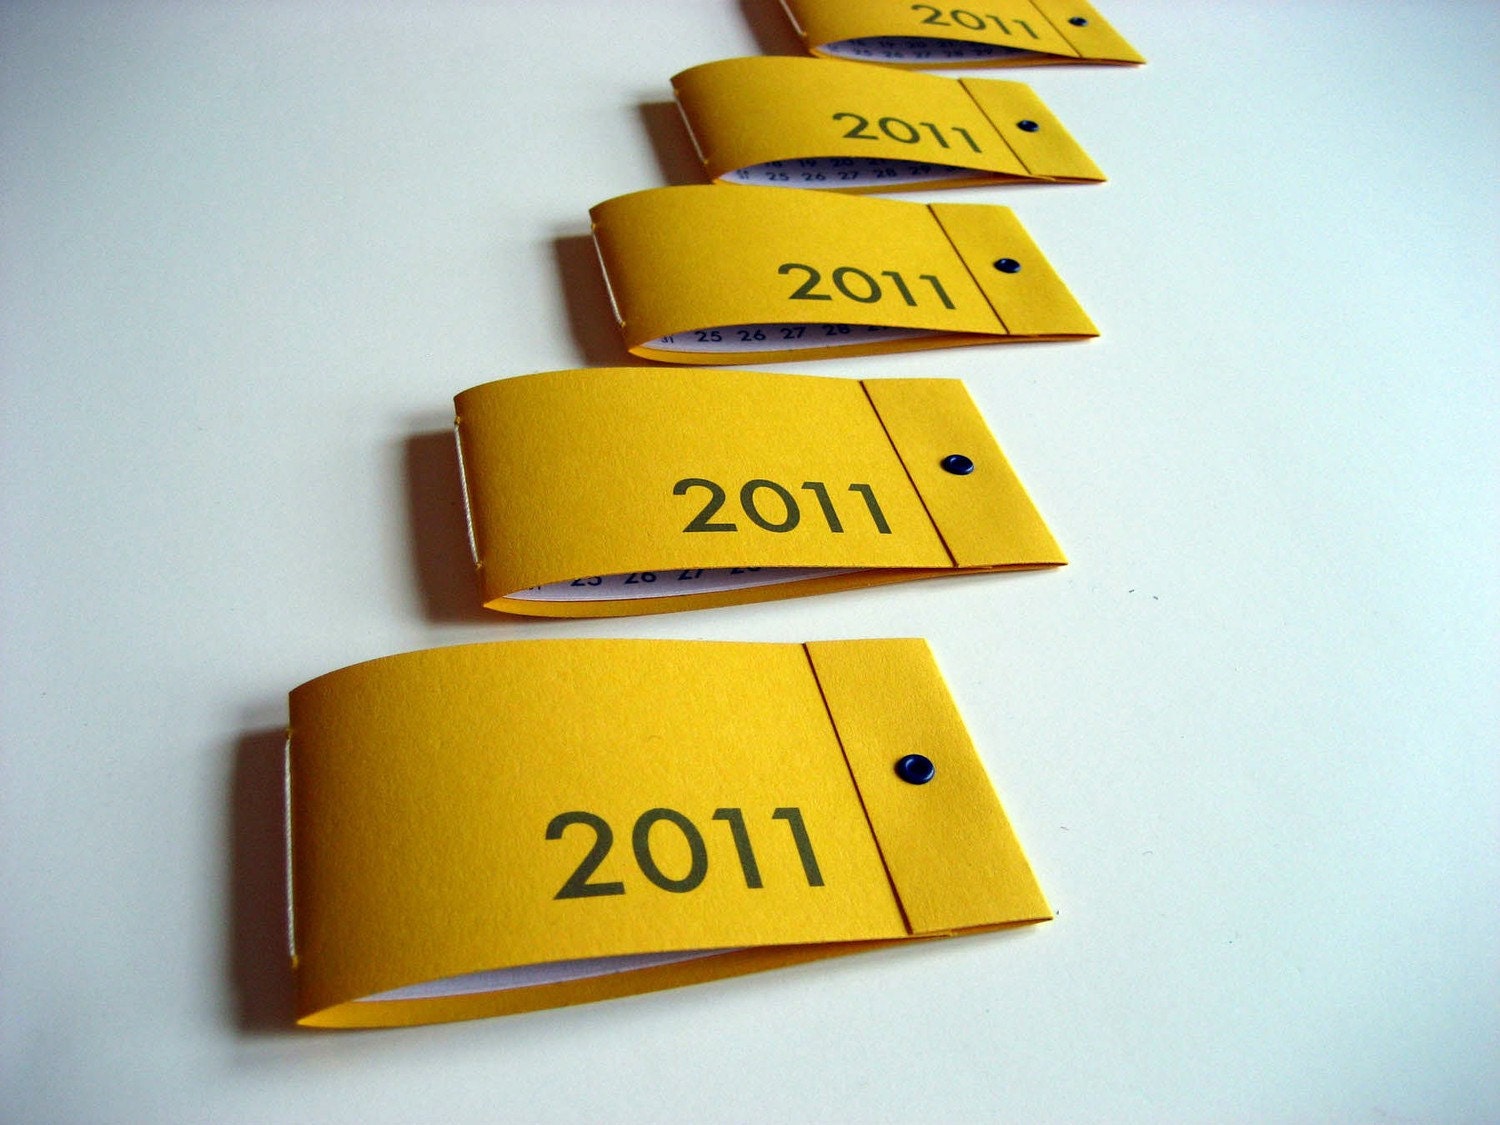 Sale 25% off - 10 Mini 2011 Calendar Matchbook Notebooks on yellow - custom party favors - Ready to Ship